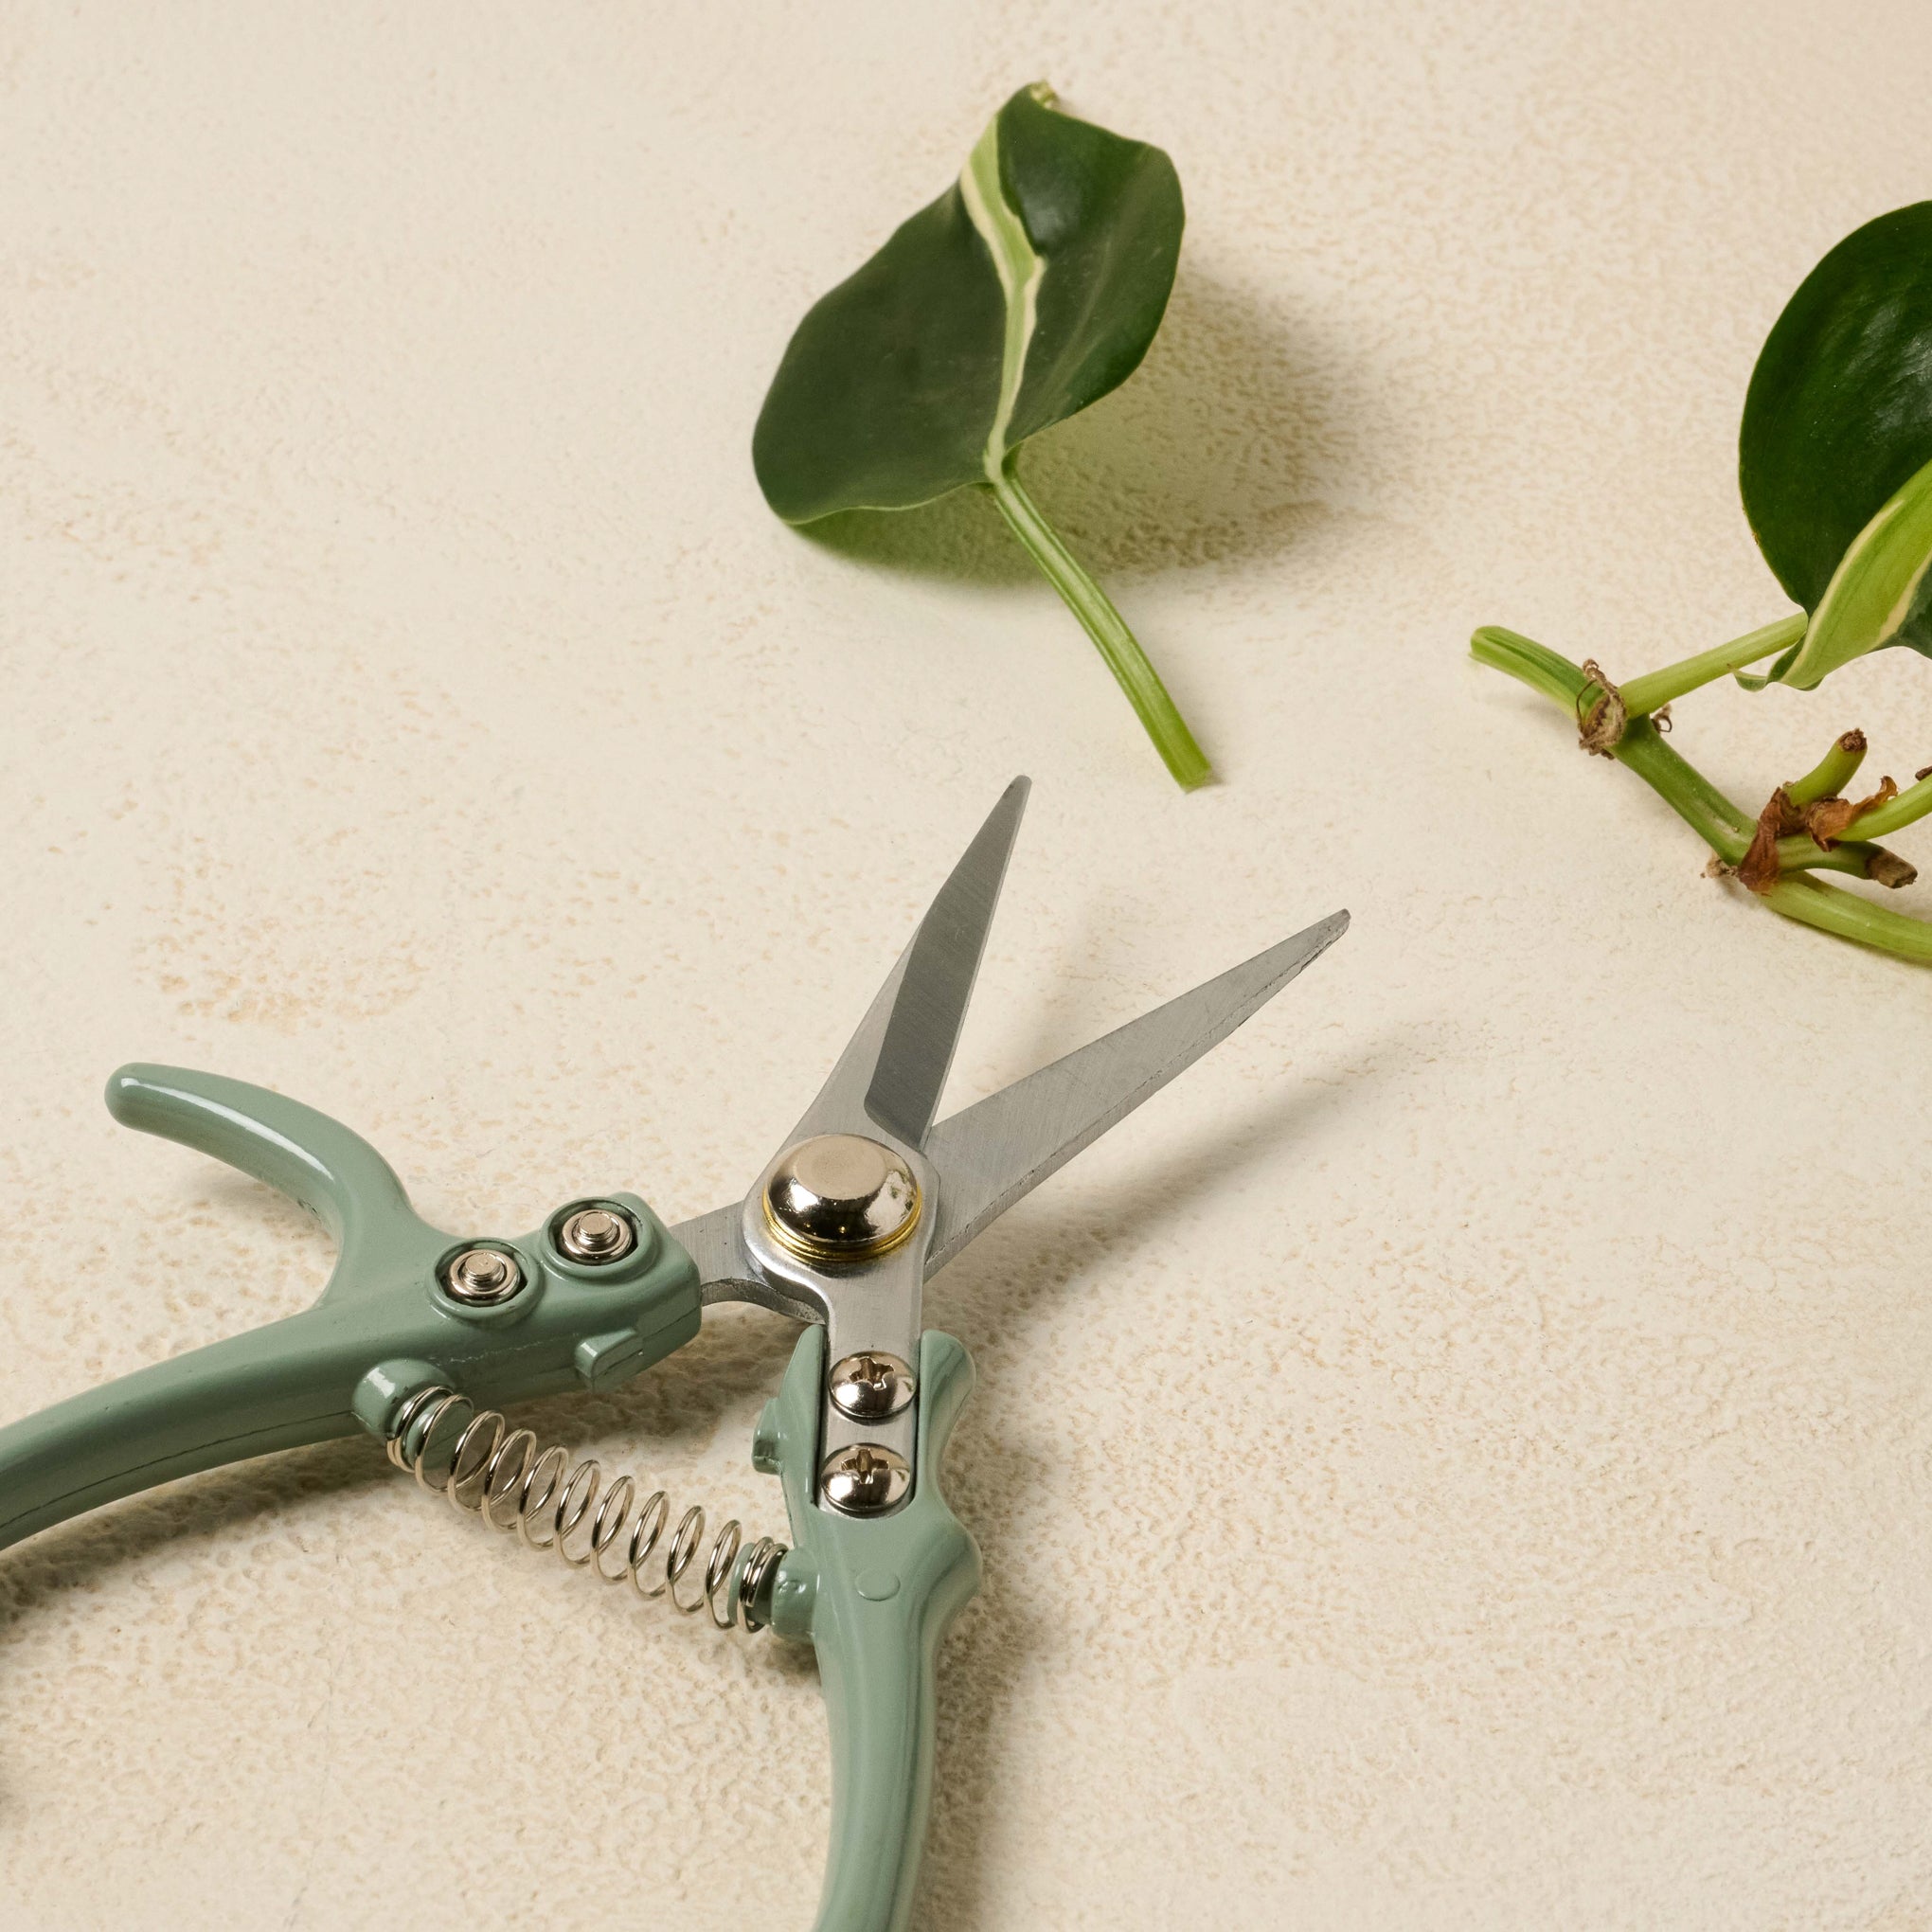 Pale Mint Pruning Shears next to cut leaves$18.00